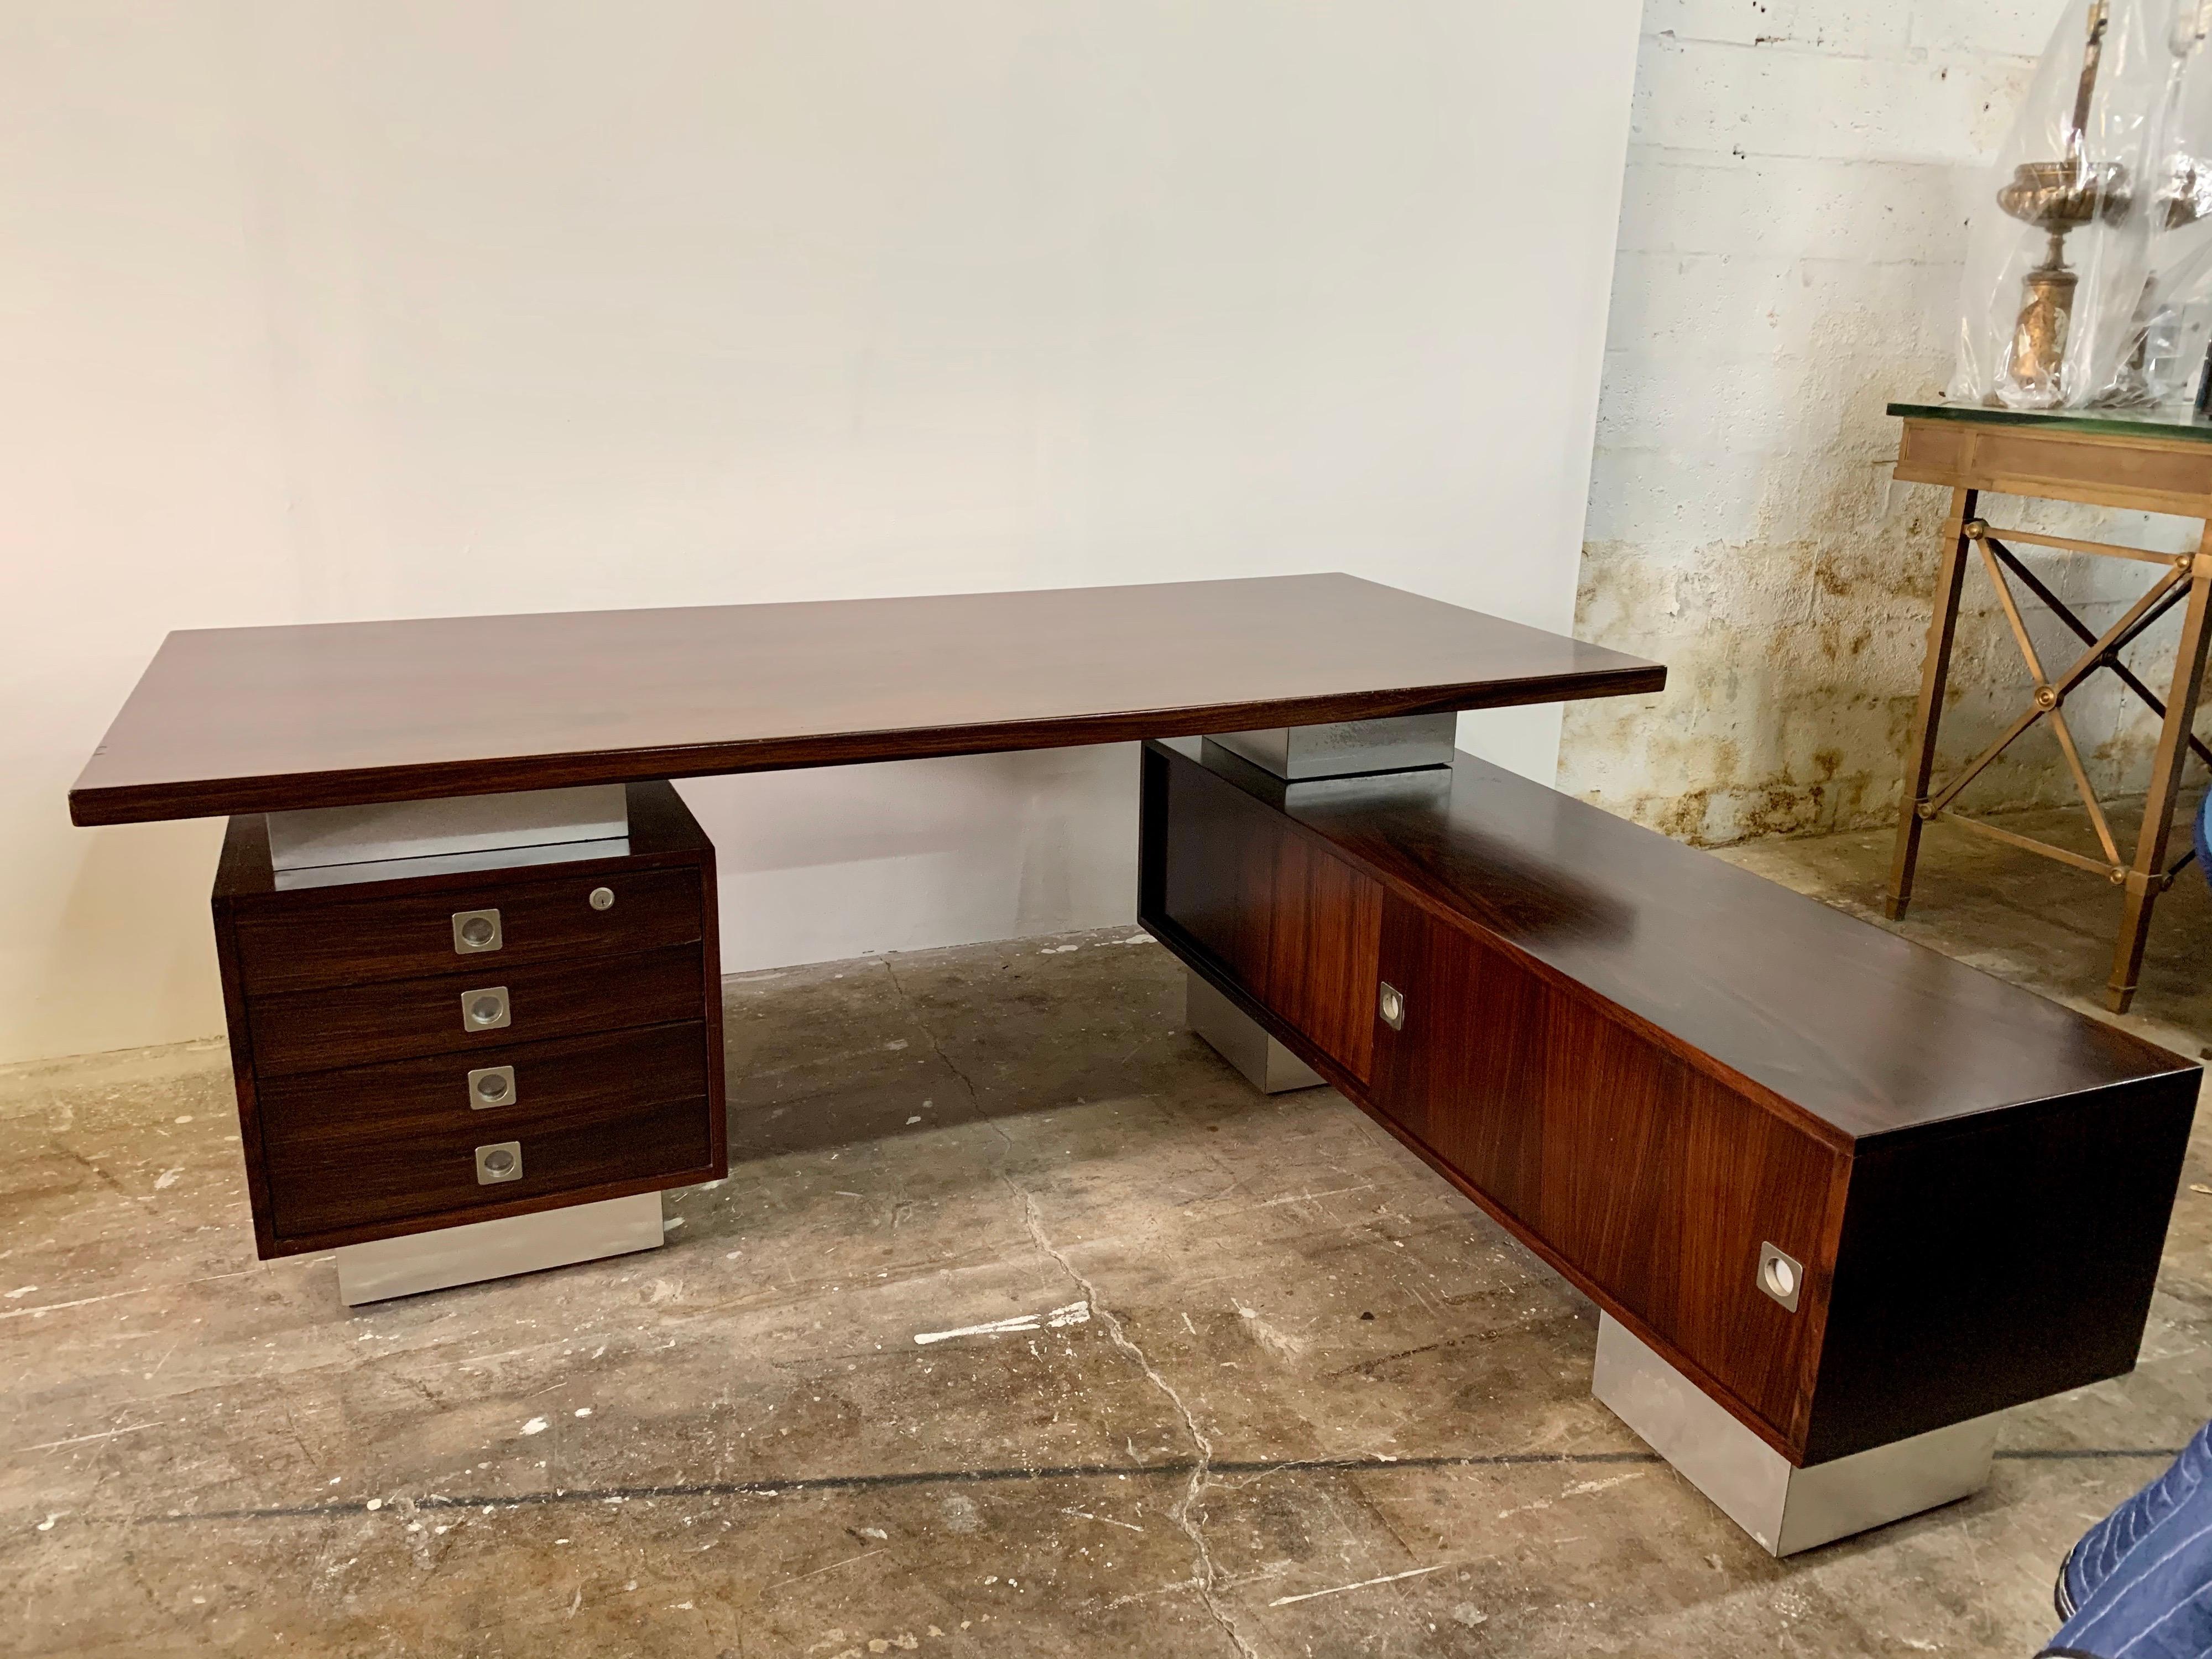 This outstanding executive desk is comprised of 3 parts; the top, the left side drawer’s cabinet and the right side long storage with sliding doors on both sides. It is all original fruitwood as acquired in Europe. This has not been restored because